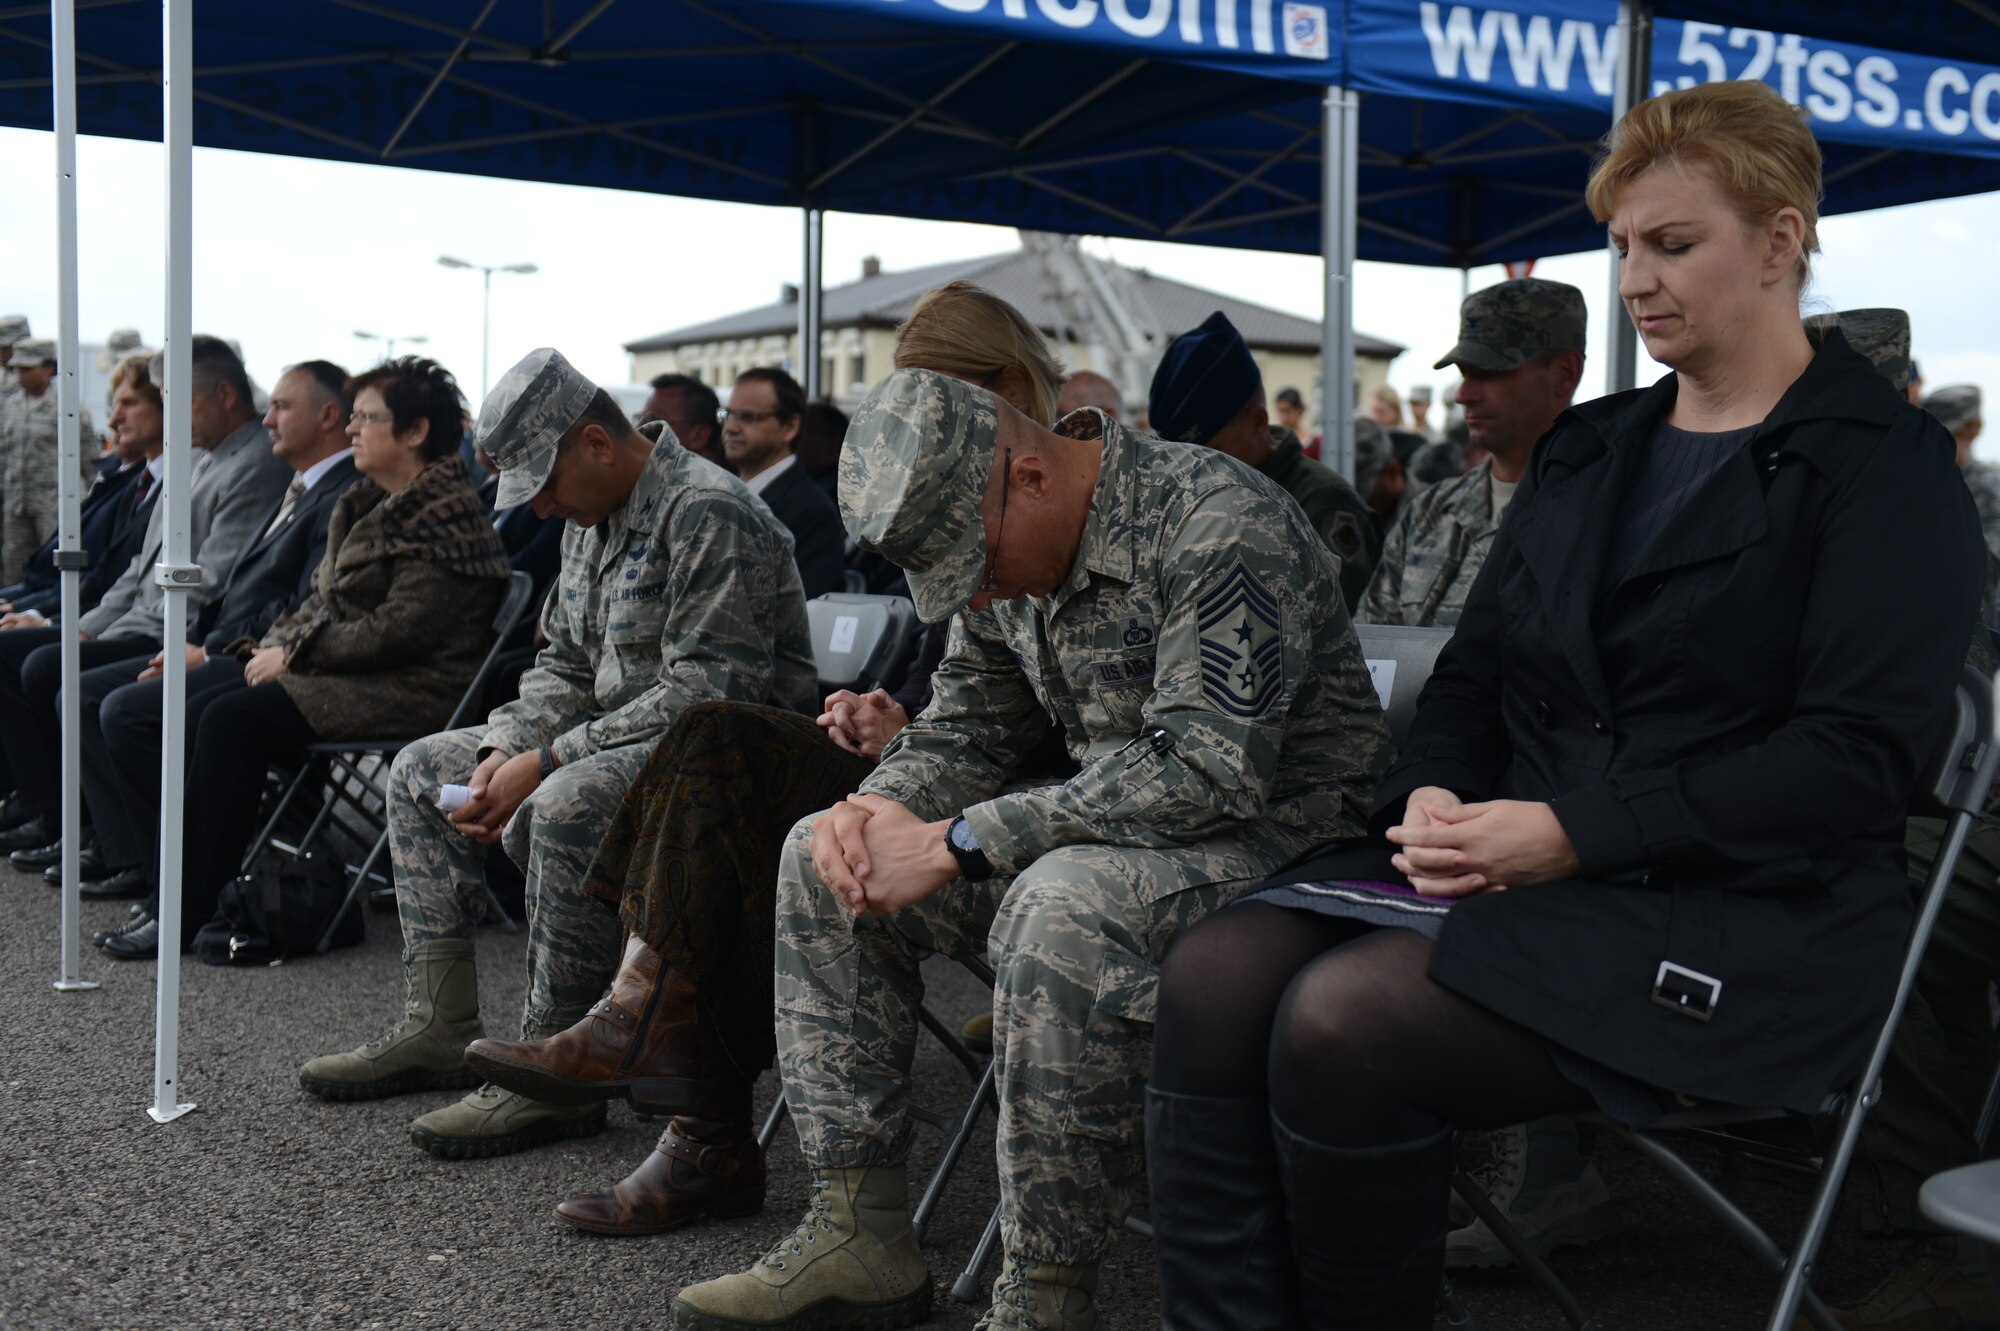 SPANGDAHLEM AIR BASE, Germany – Members of the Spangdahlem community take a moment during a 9/11 commemorative ceremony Sept. 11, 2013, to remember those who lost their lives. The ceremony included a prayer, poem reading and remembrance of the attack that occurred 12 years ago. (U.S. Air Force photo by Airman 1st Class Gustavo Castillo/Released) 